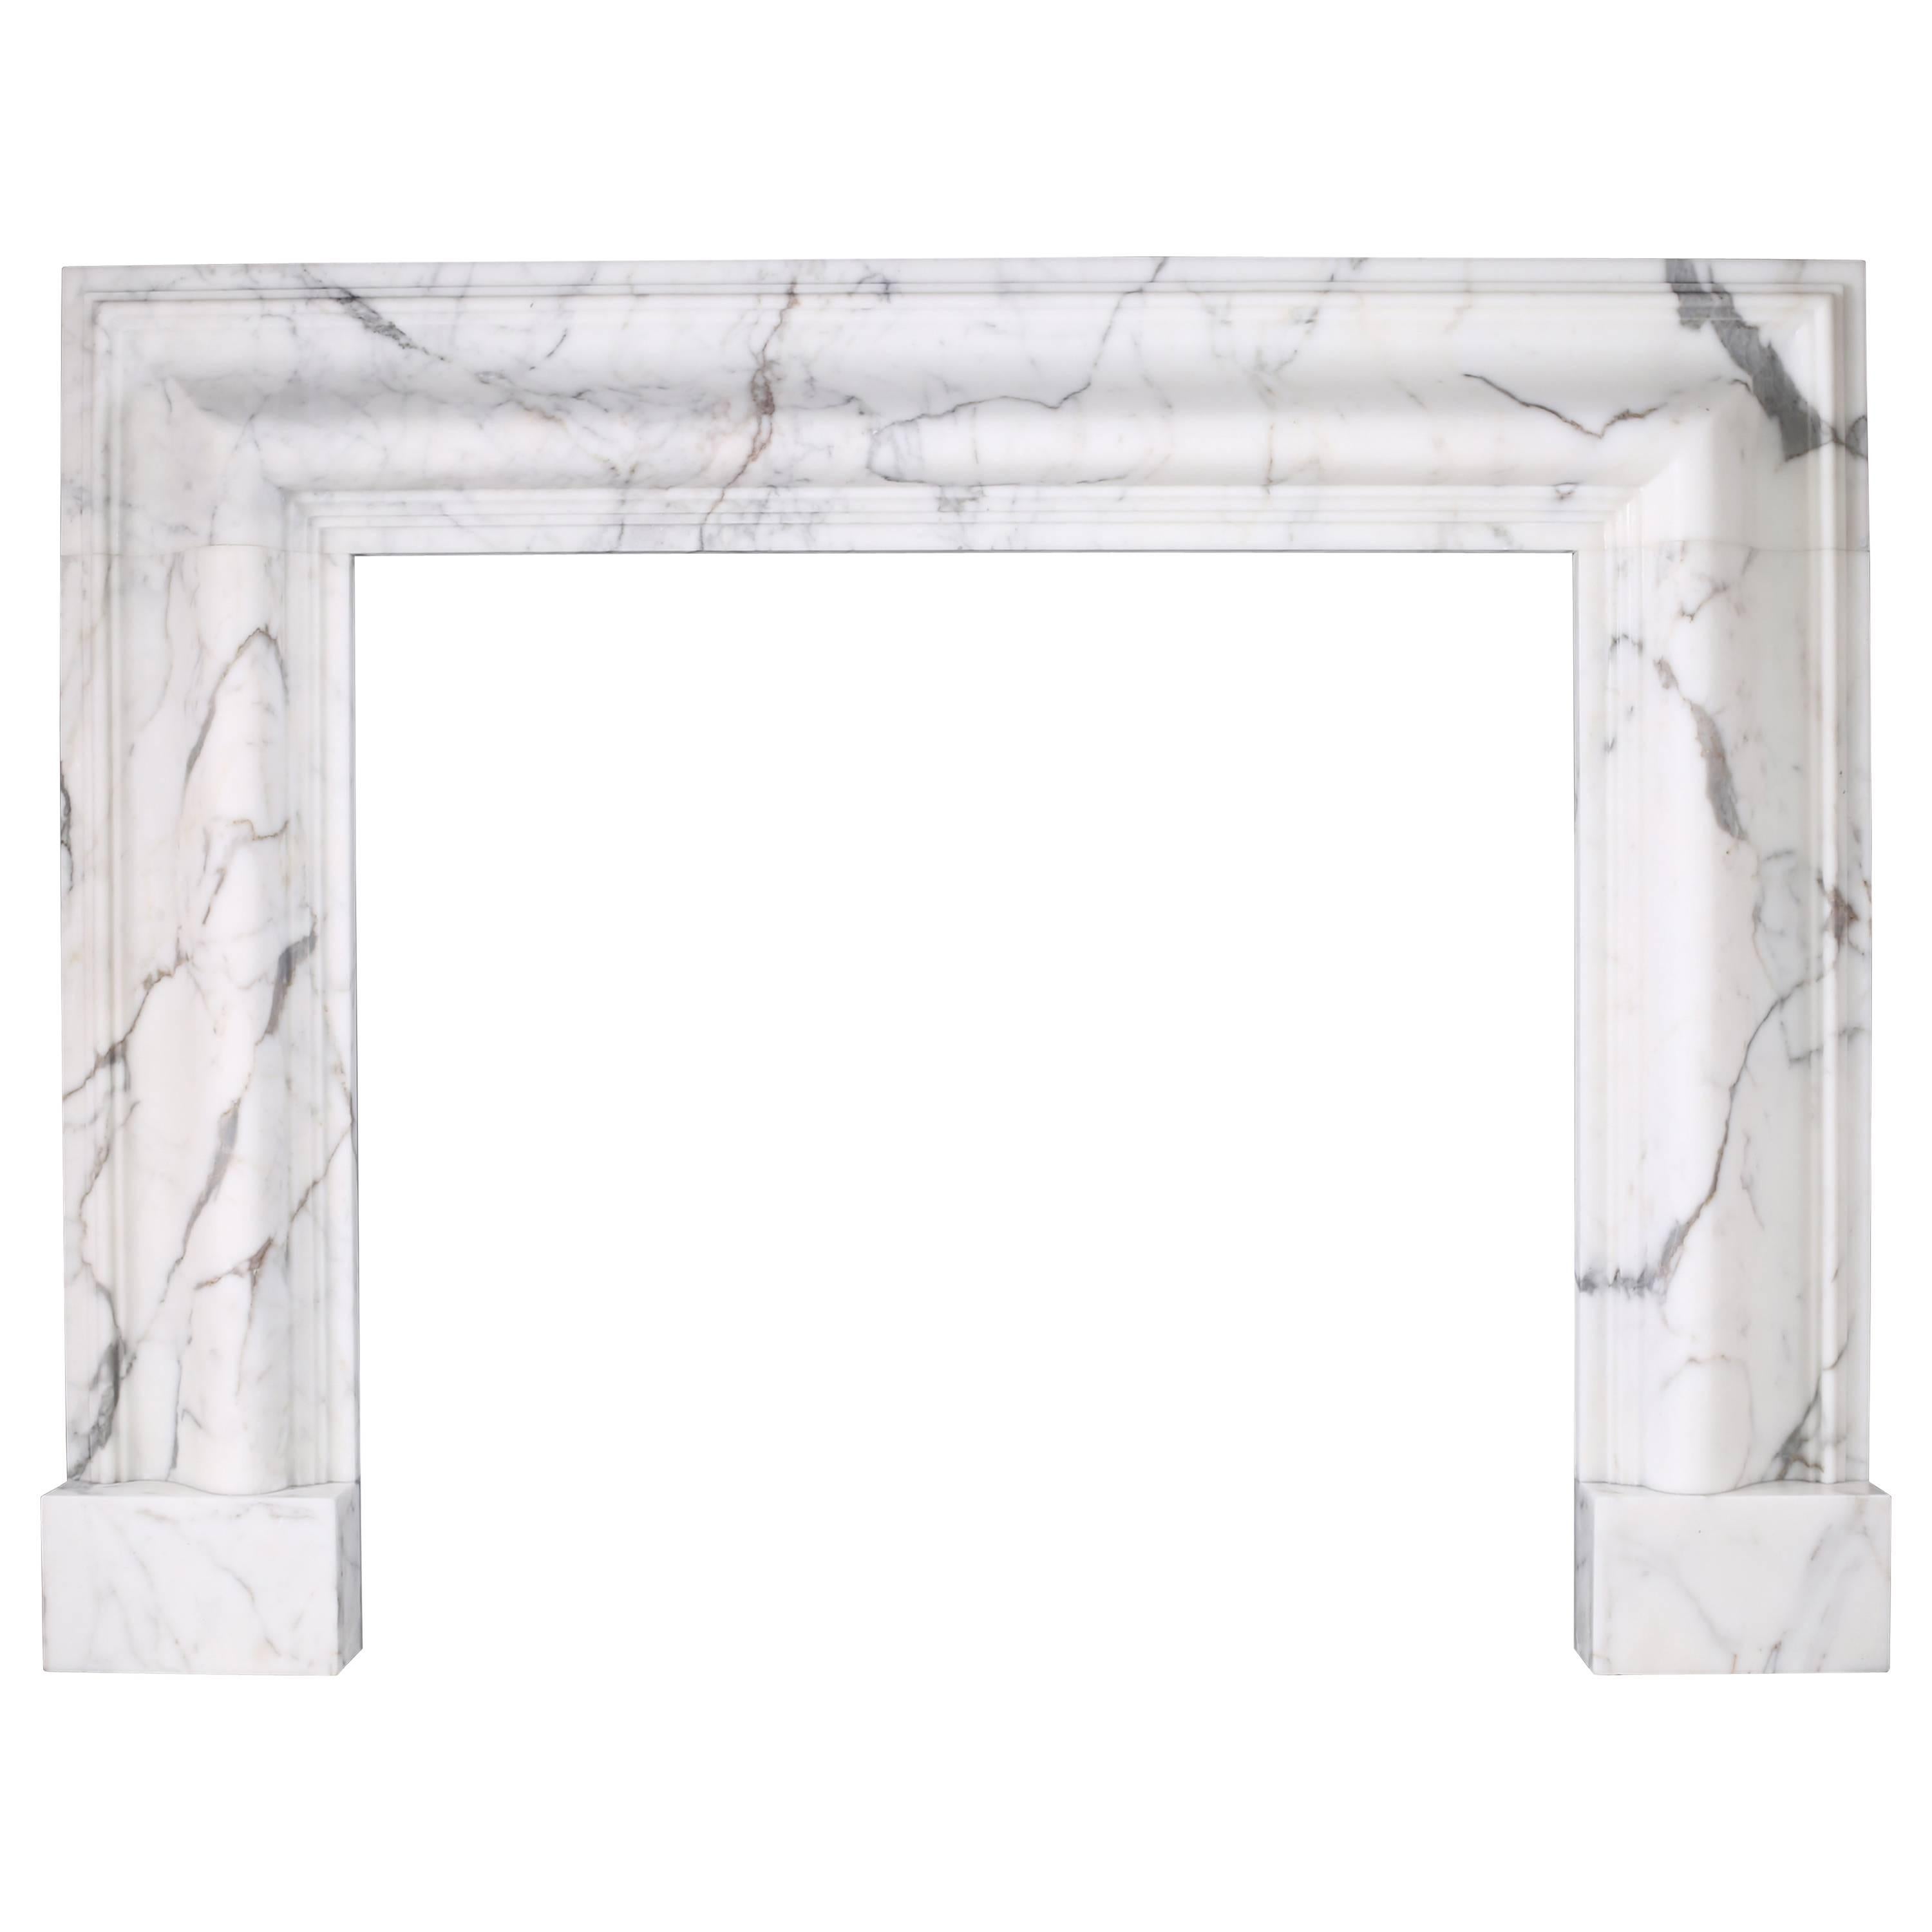 Grand Queen Anne Style Bolection Fireplace in Italian Statuary Marble Nr. 2 For Sale